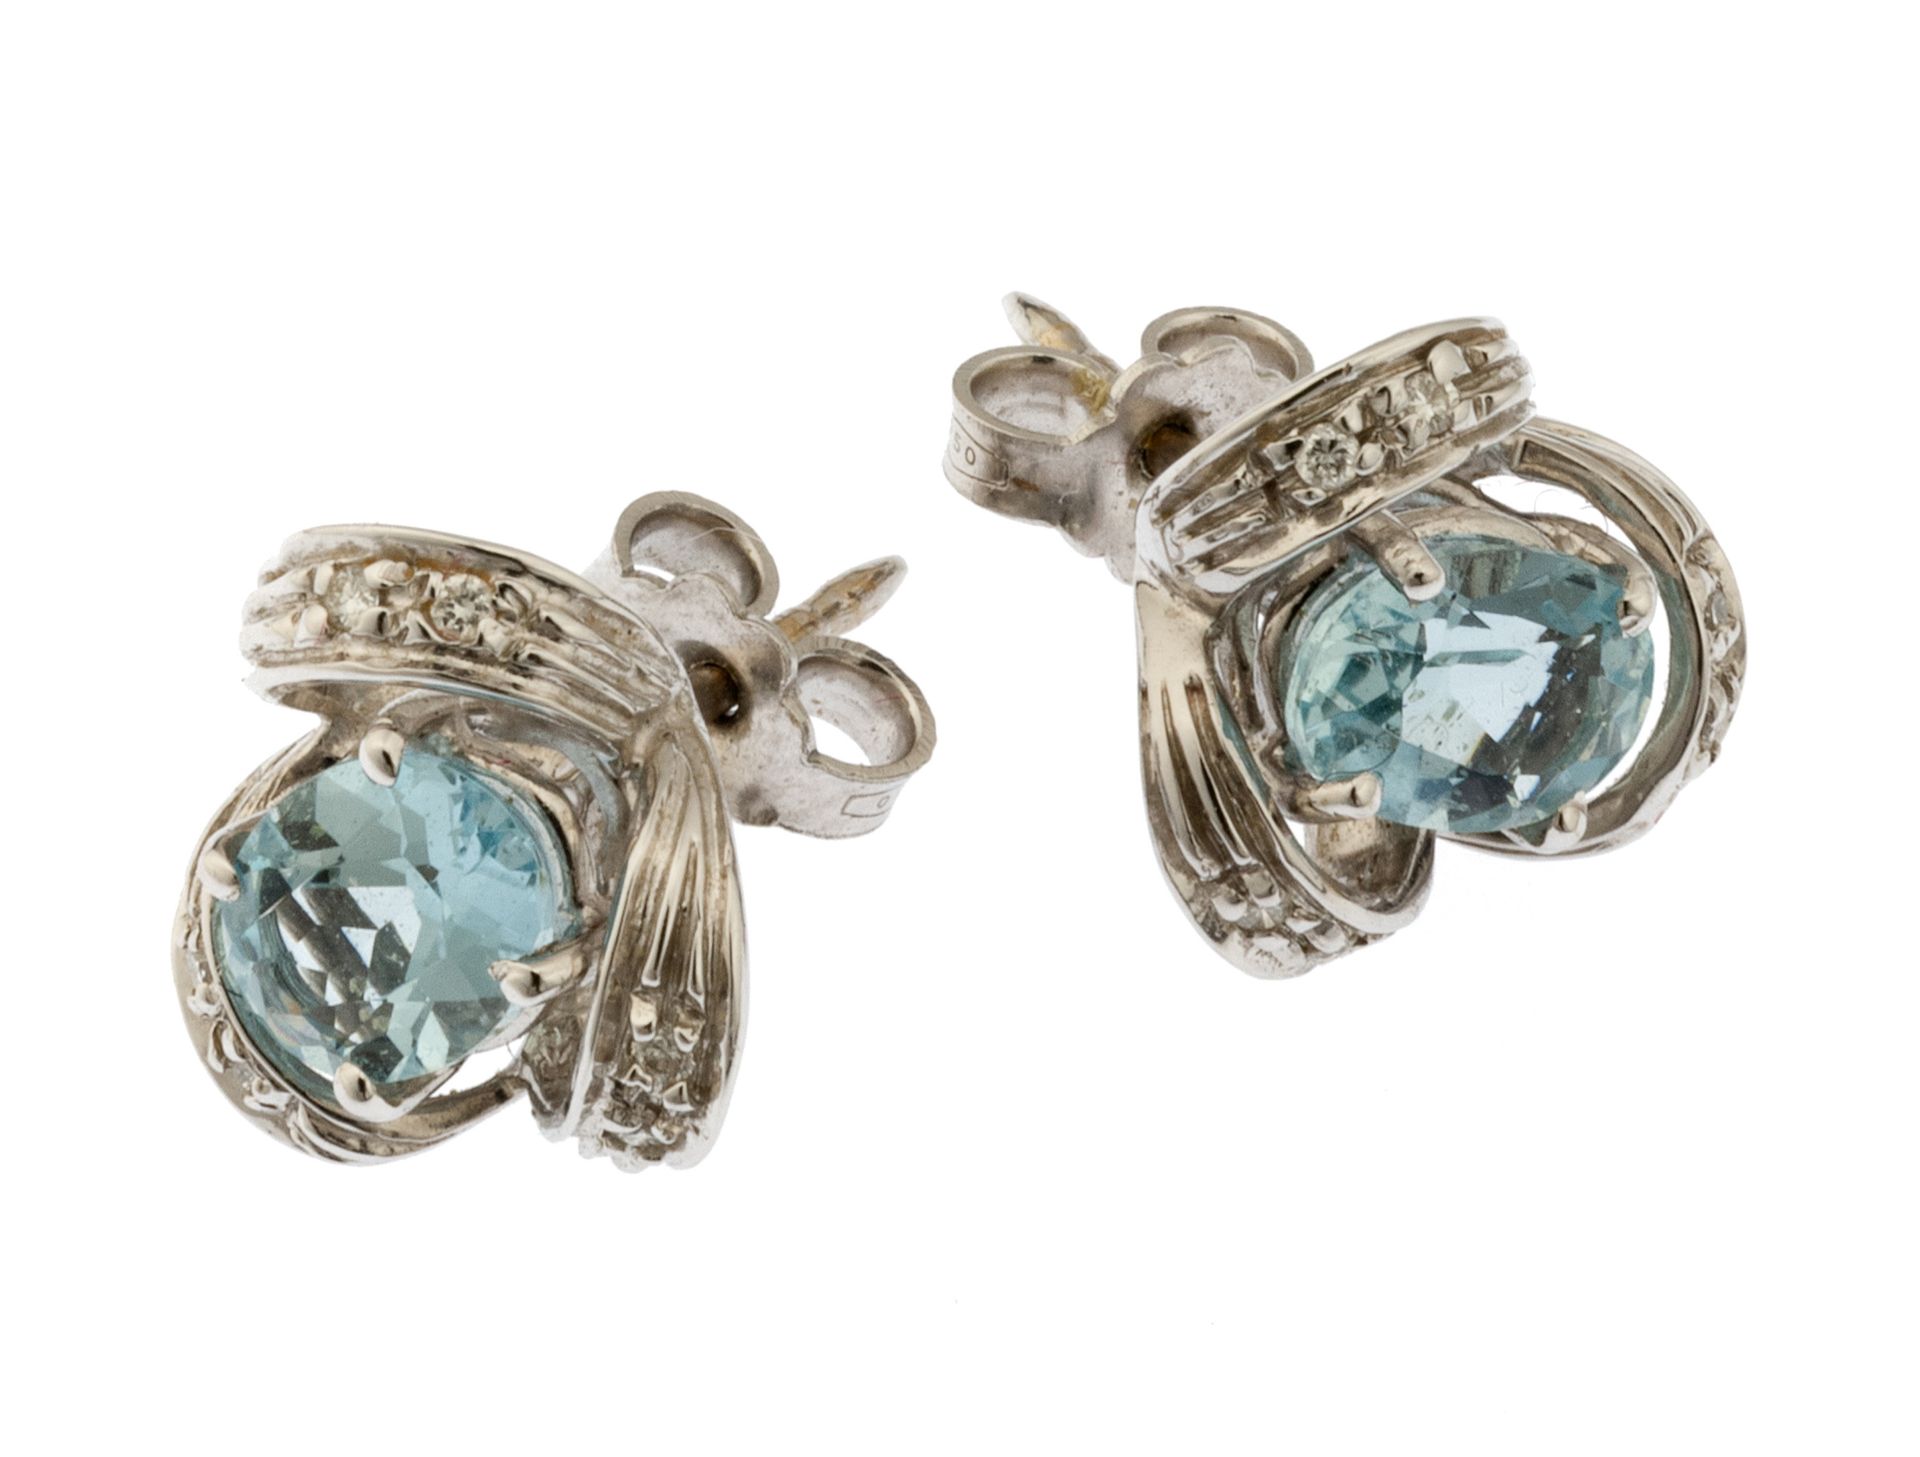 WHITE GOLD EARRINGS WITH AQUAMARINES AND DIAMONDS